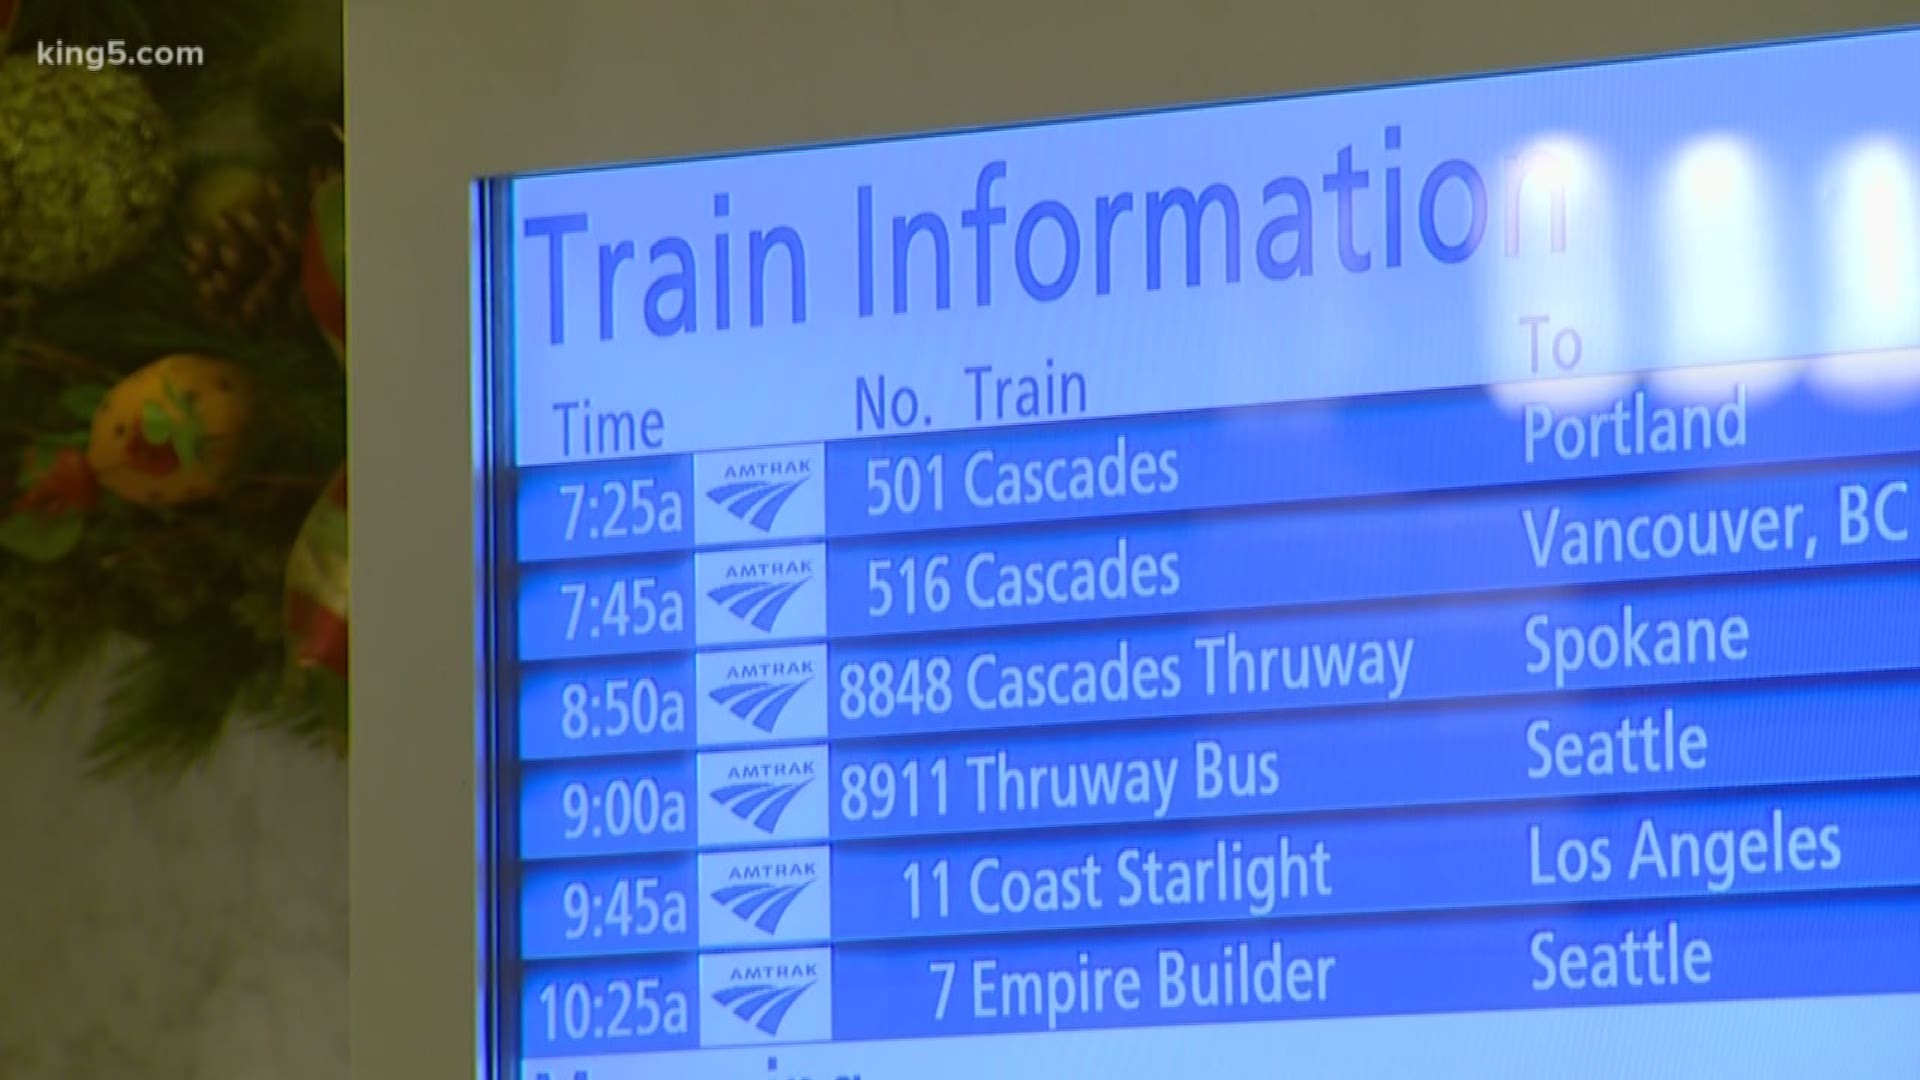 Amtrak is prepared to accommodate extra travelers during the holiday season with additional trains and seats.